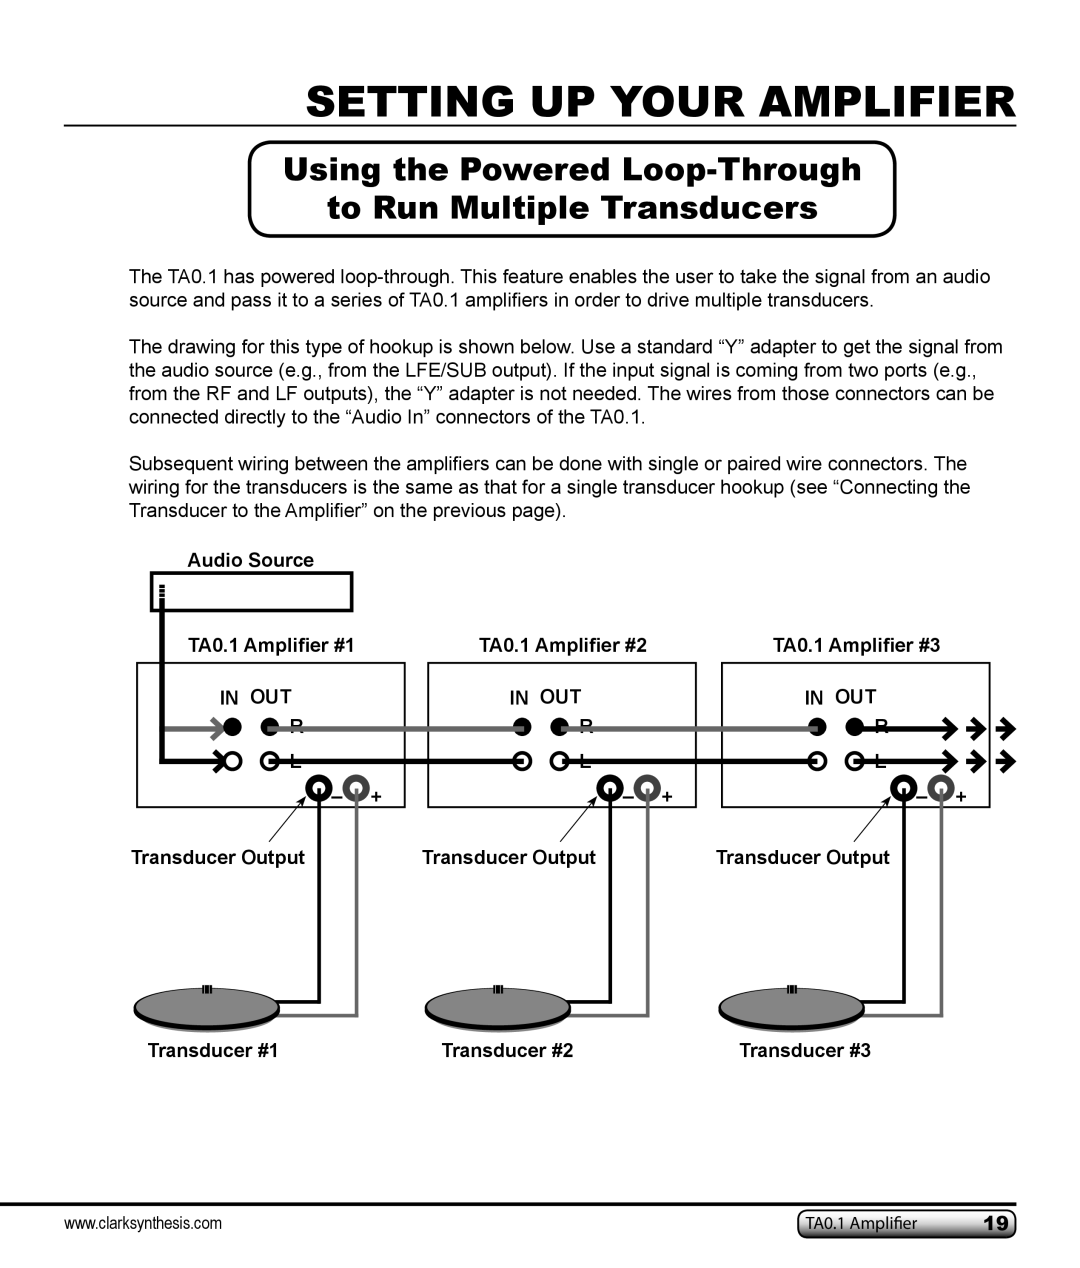 Clark Synthesis TA0.1 owner manual Using the Powered Loop-Through, to Run Multiple Transducers, Setting Up Your Amplifier 